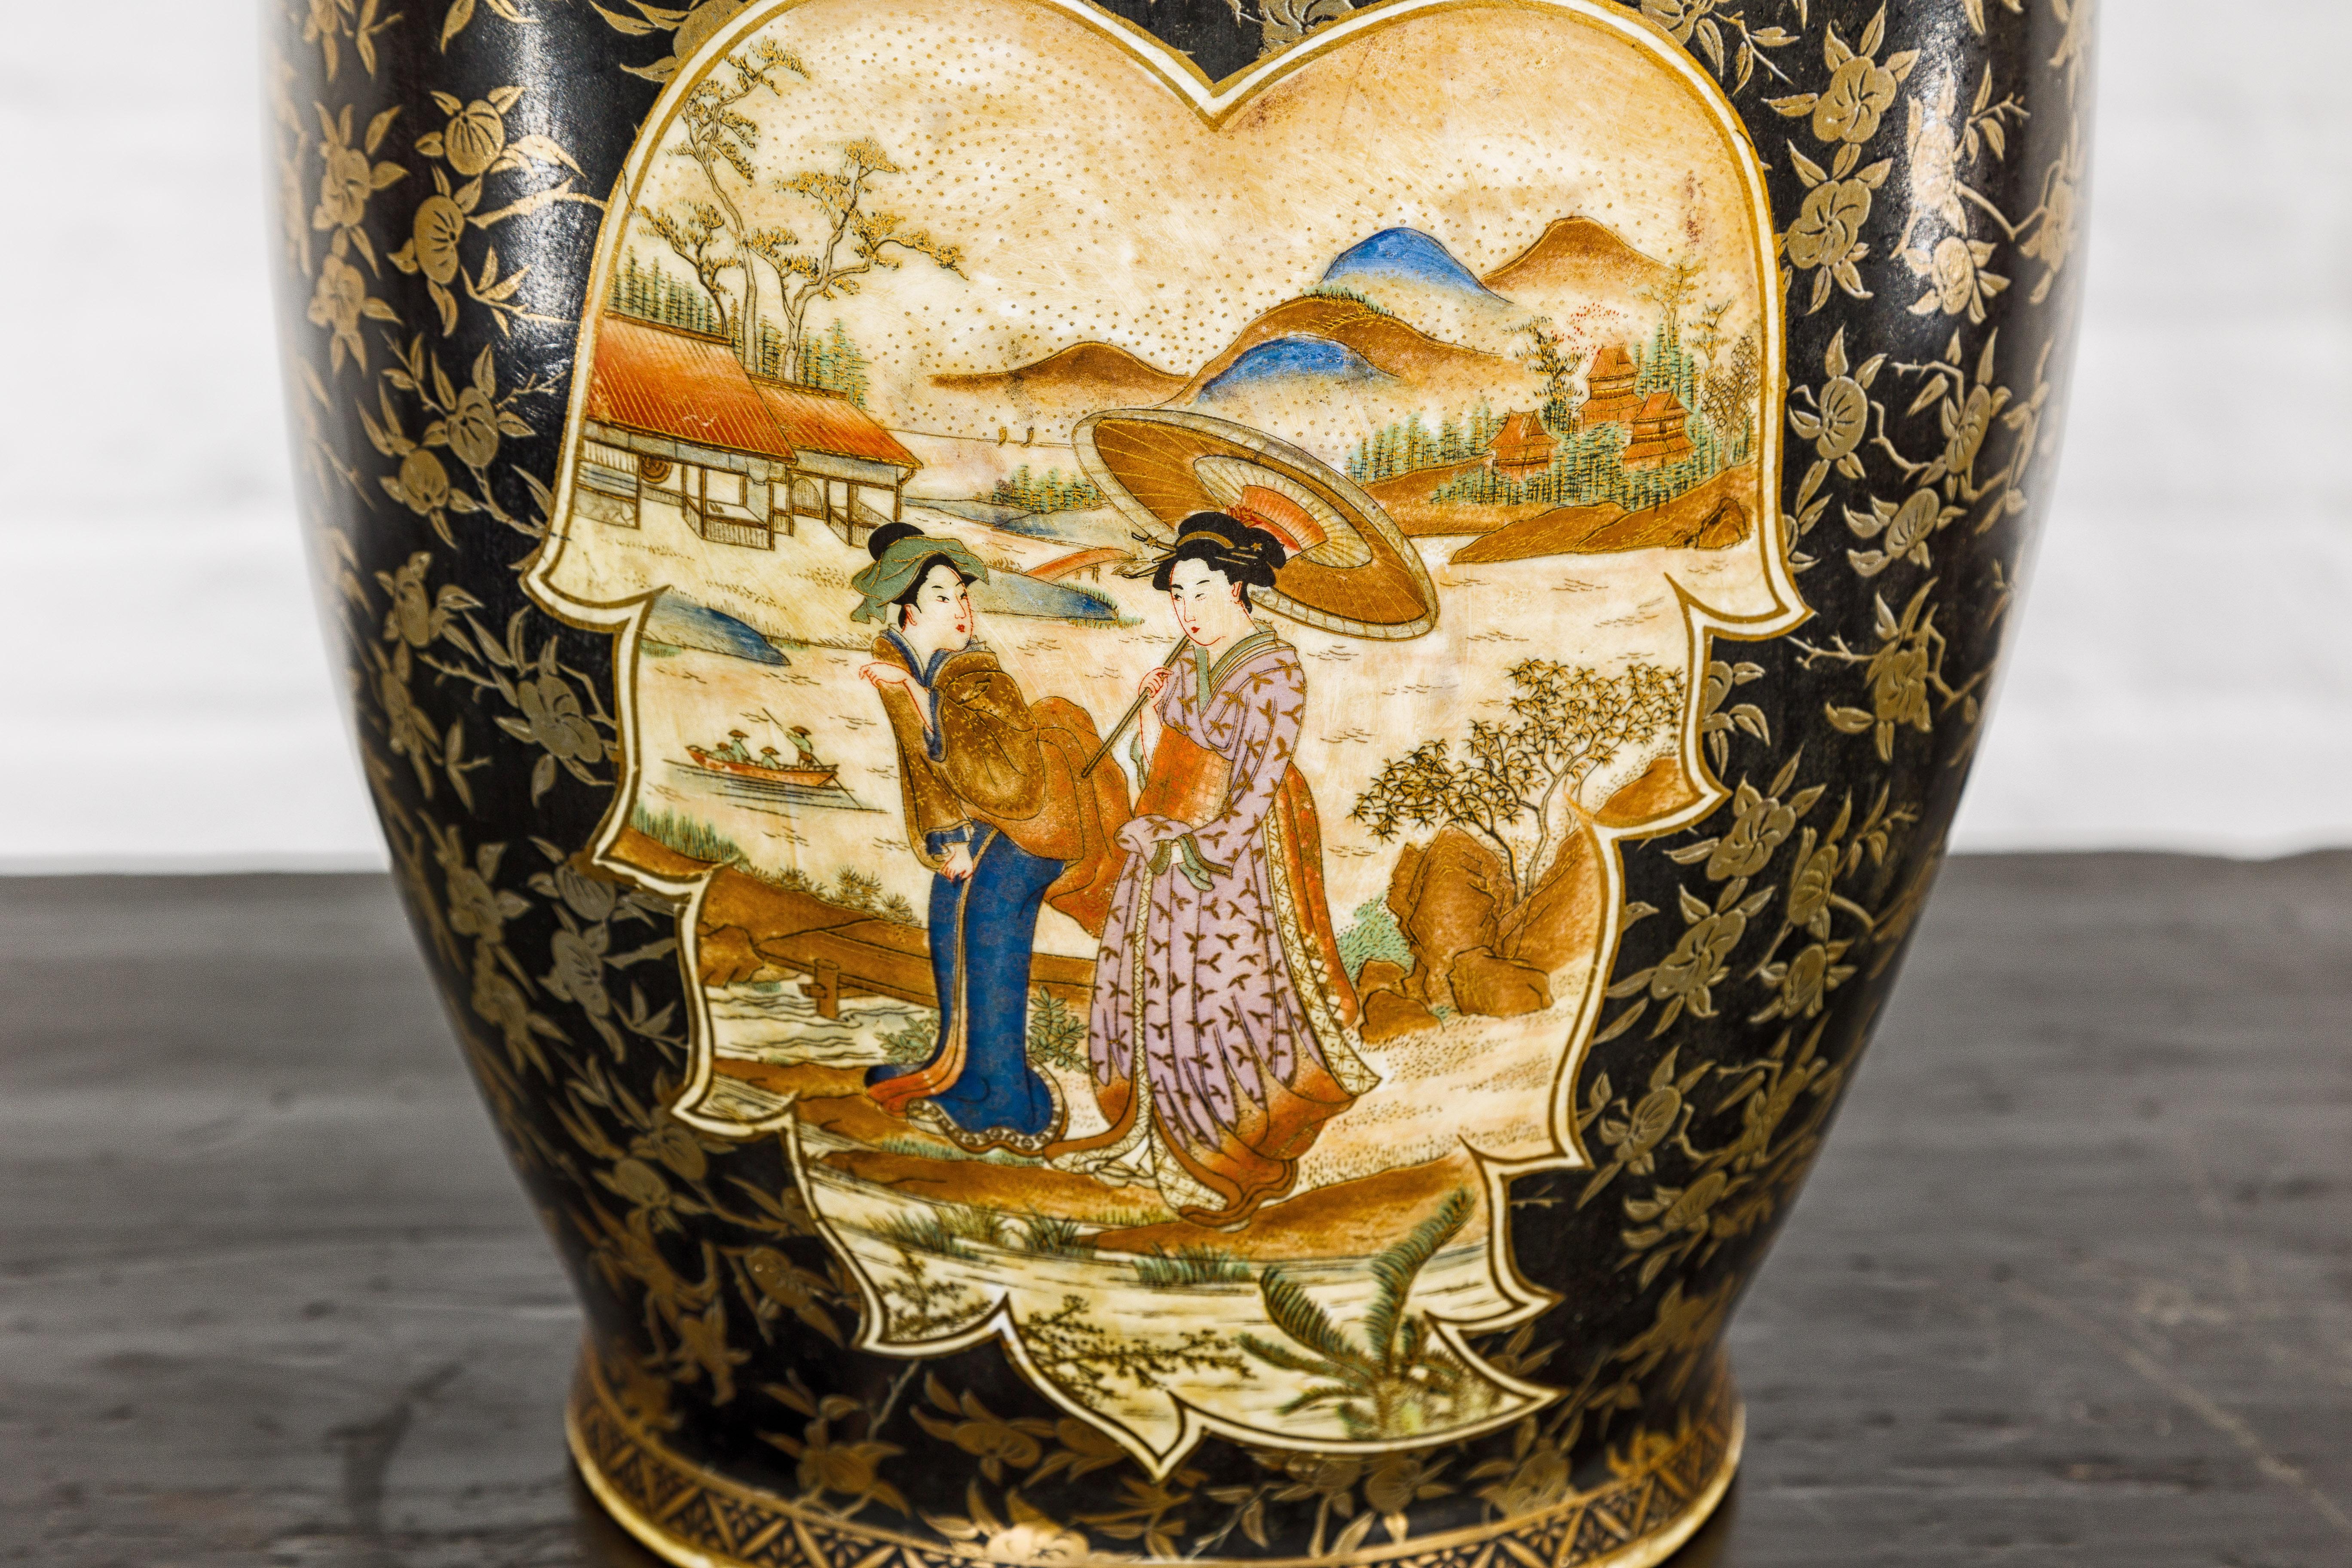 Japanese Inspired Black and Gold Vase with Family Scenes and Foo Dog Handles For Sale 8